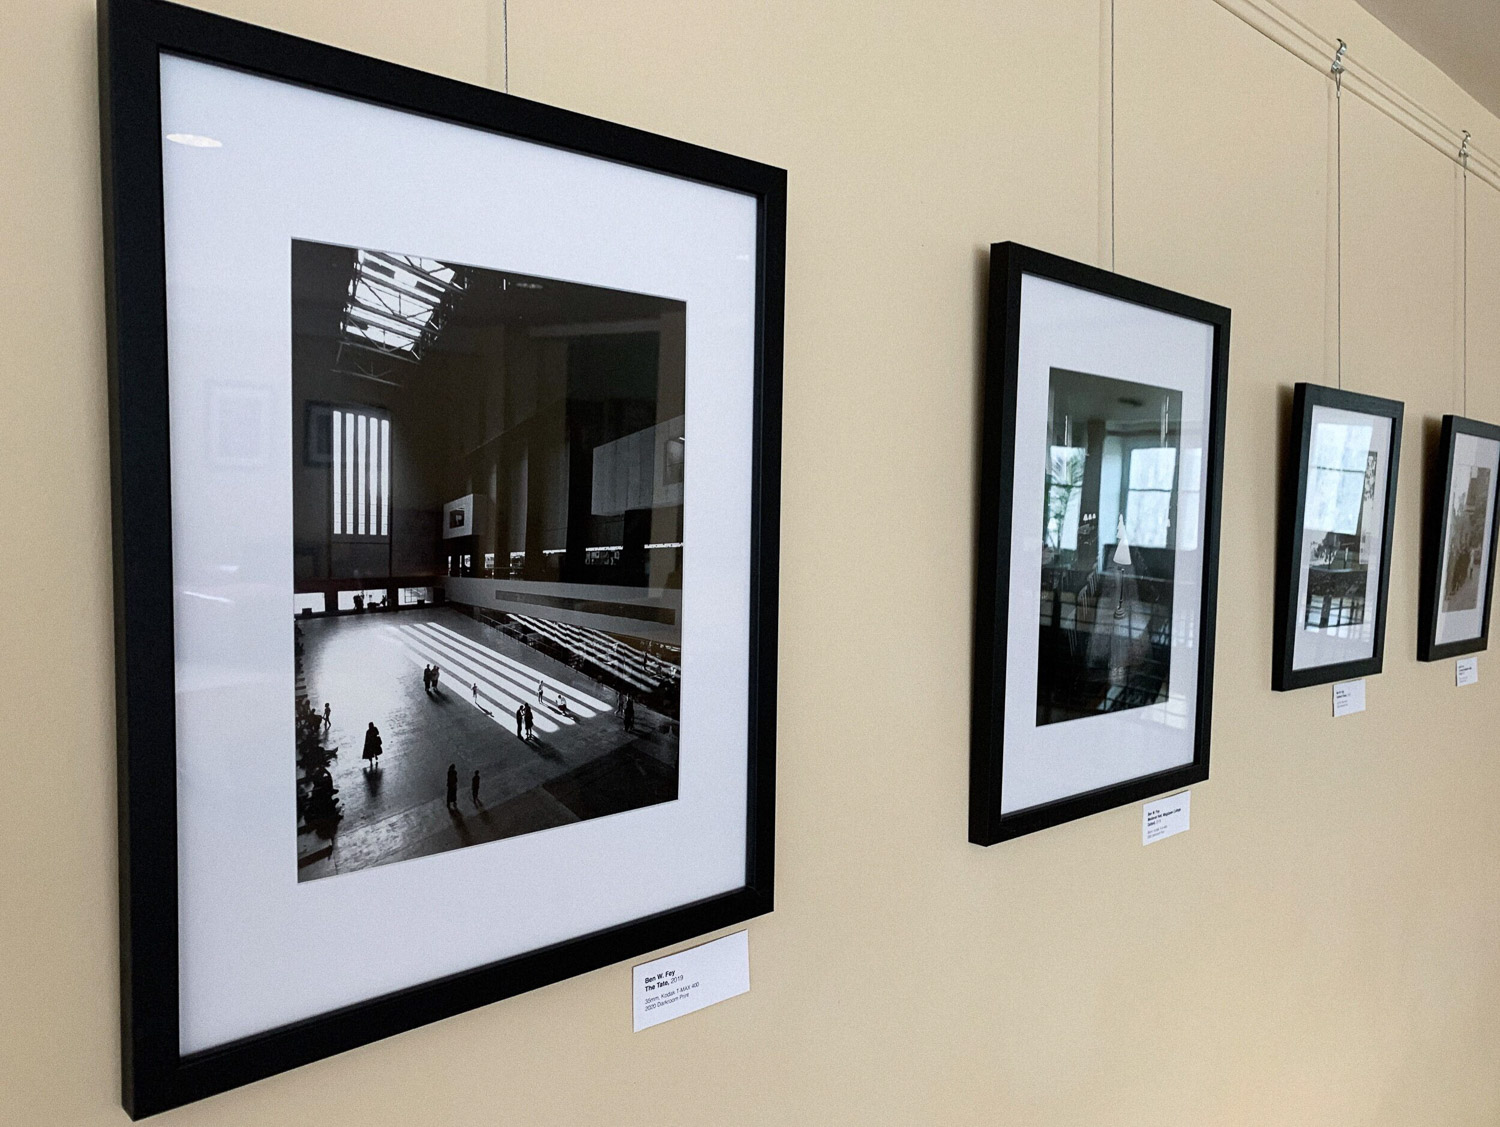 framed darkroom prints by Ben W. Fey hanging on the wall